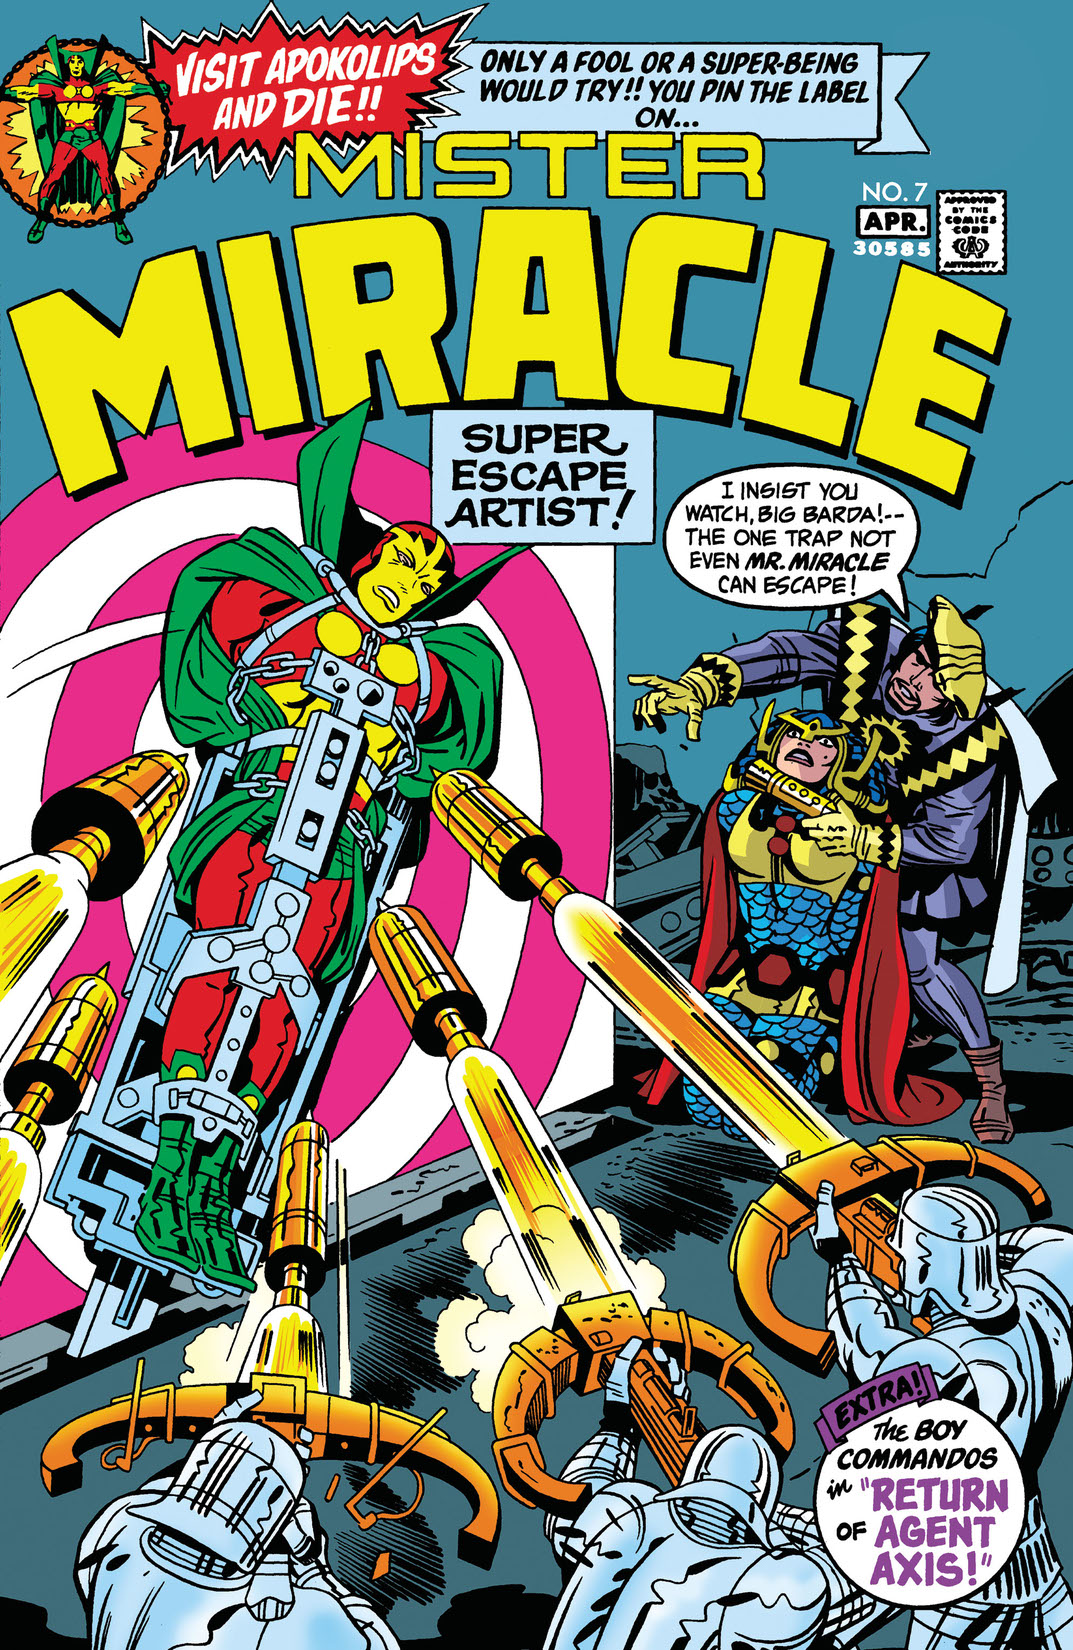 Mister Miracle (1971-) #7 preview images